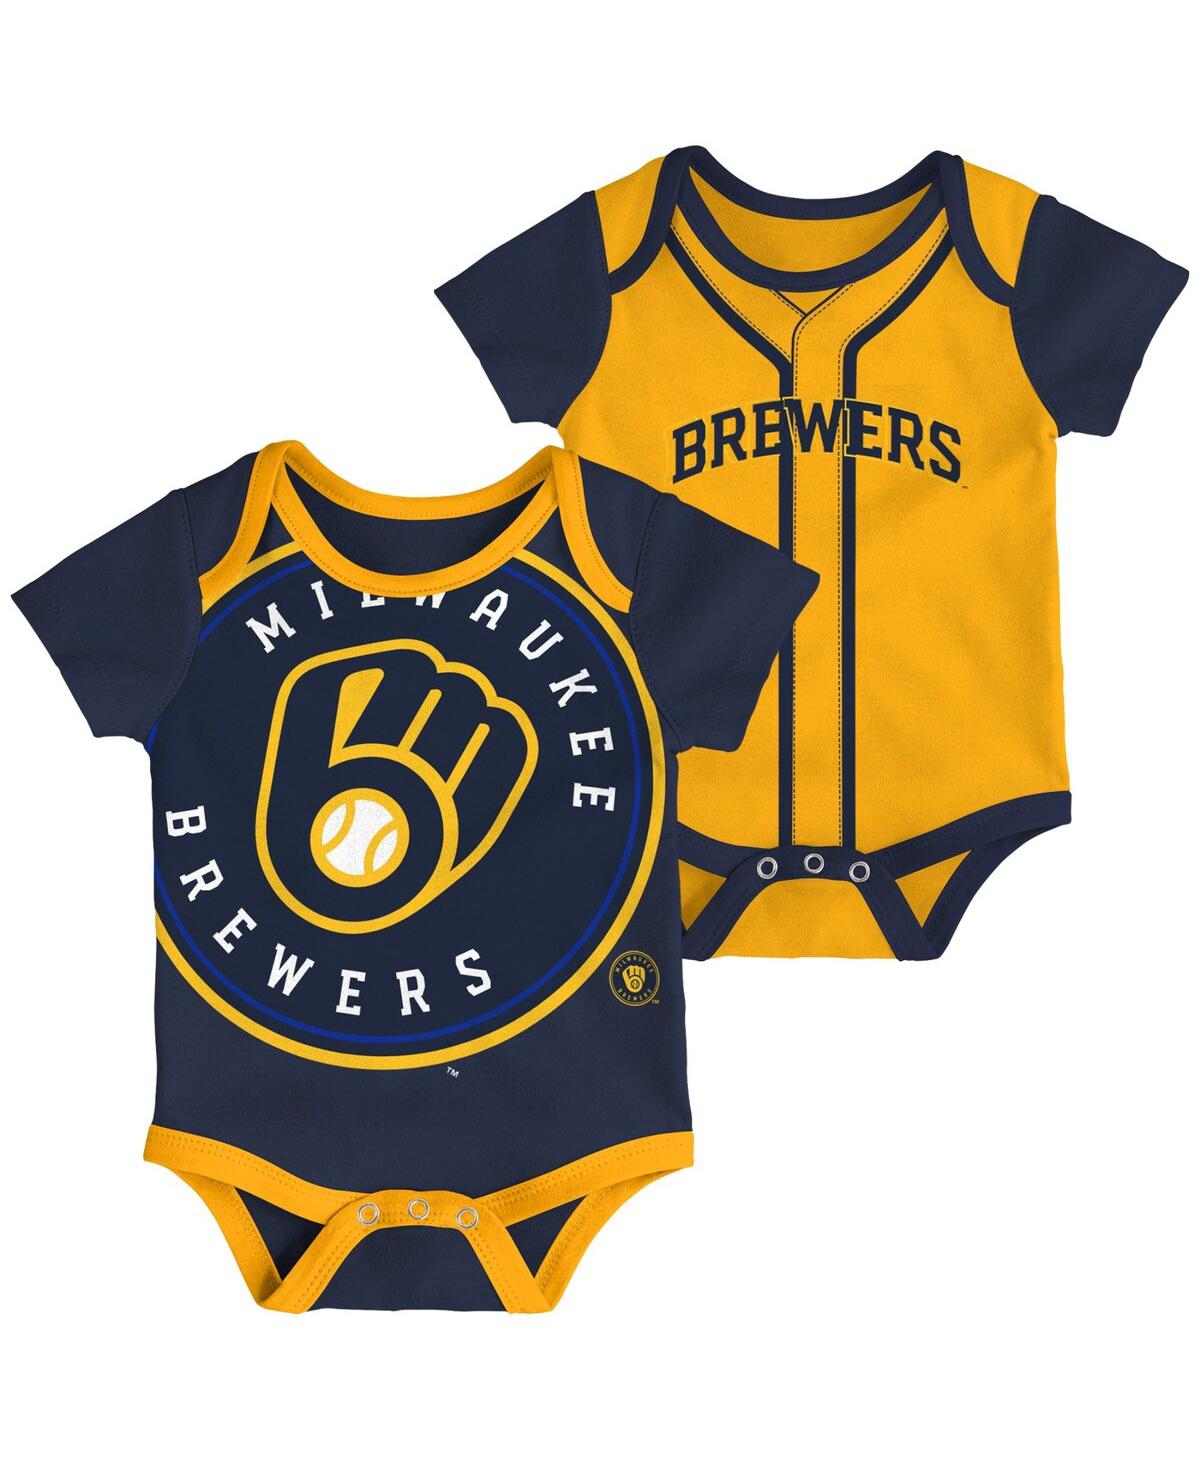 Outerstuff Babies' Newborn Boys And Girls Navy, Gold Milwaukee Brewers Double Two-pack Bodysuit Set In Navy,gold